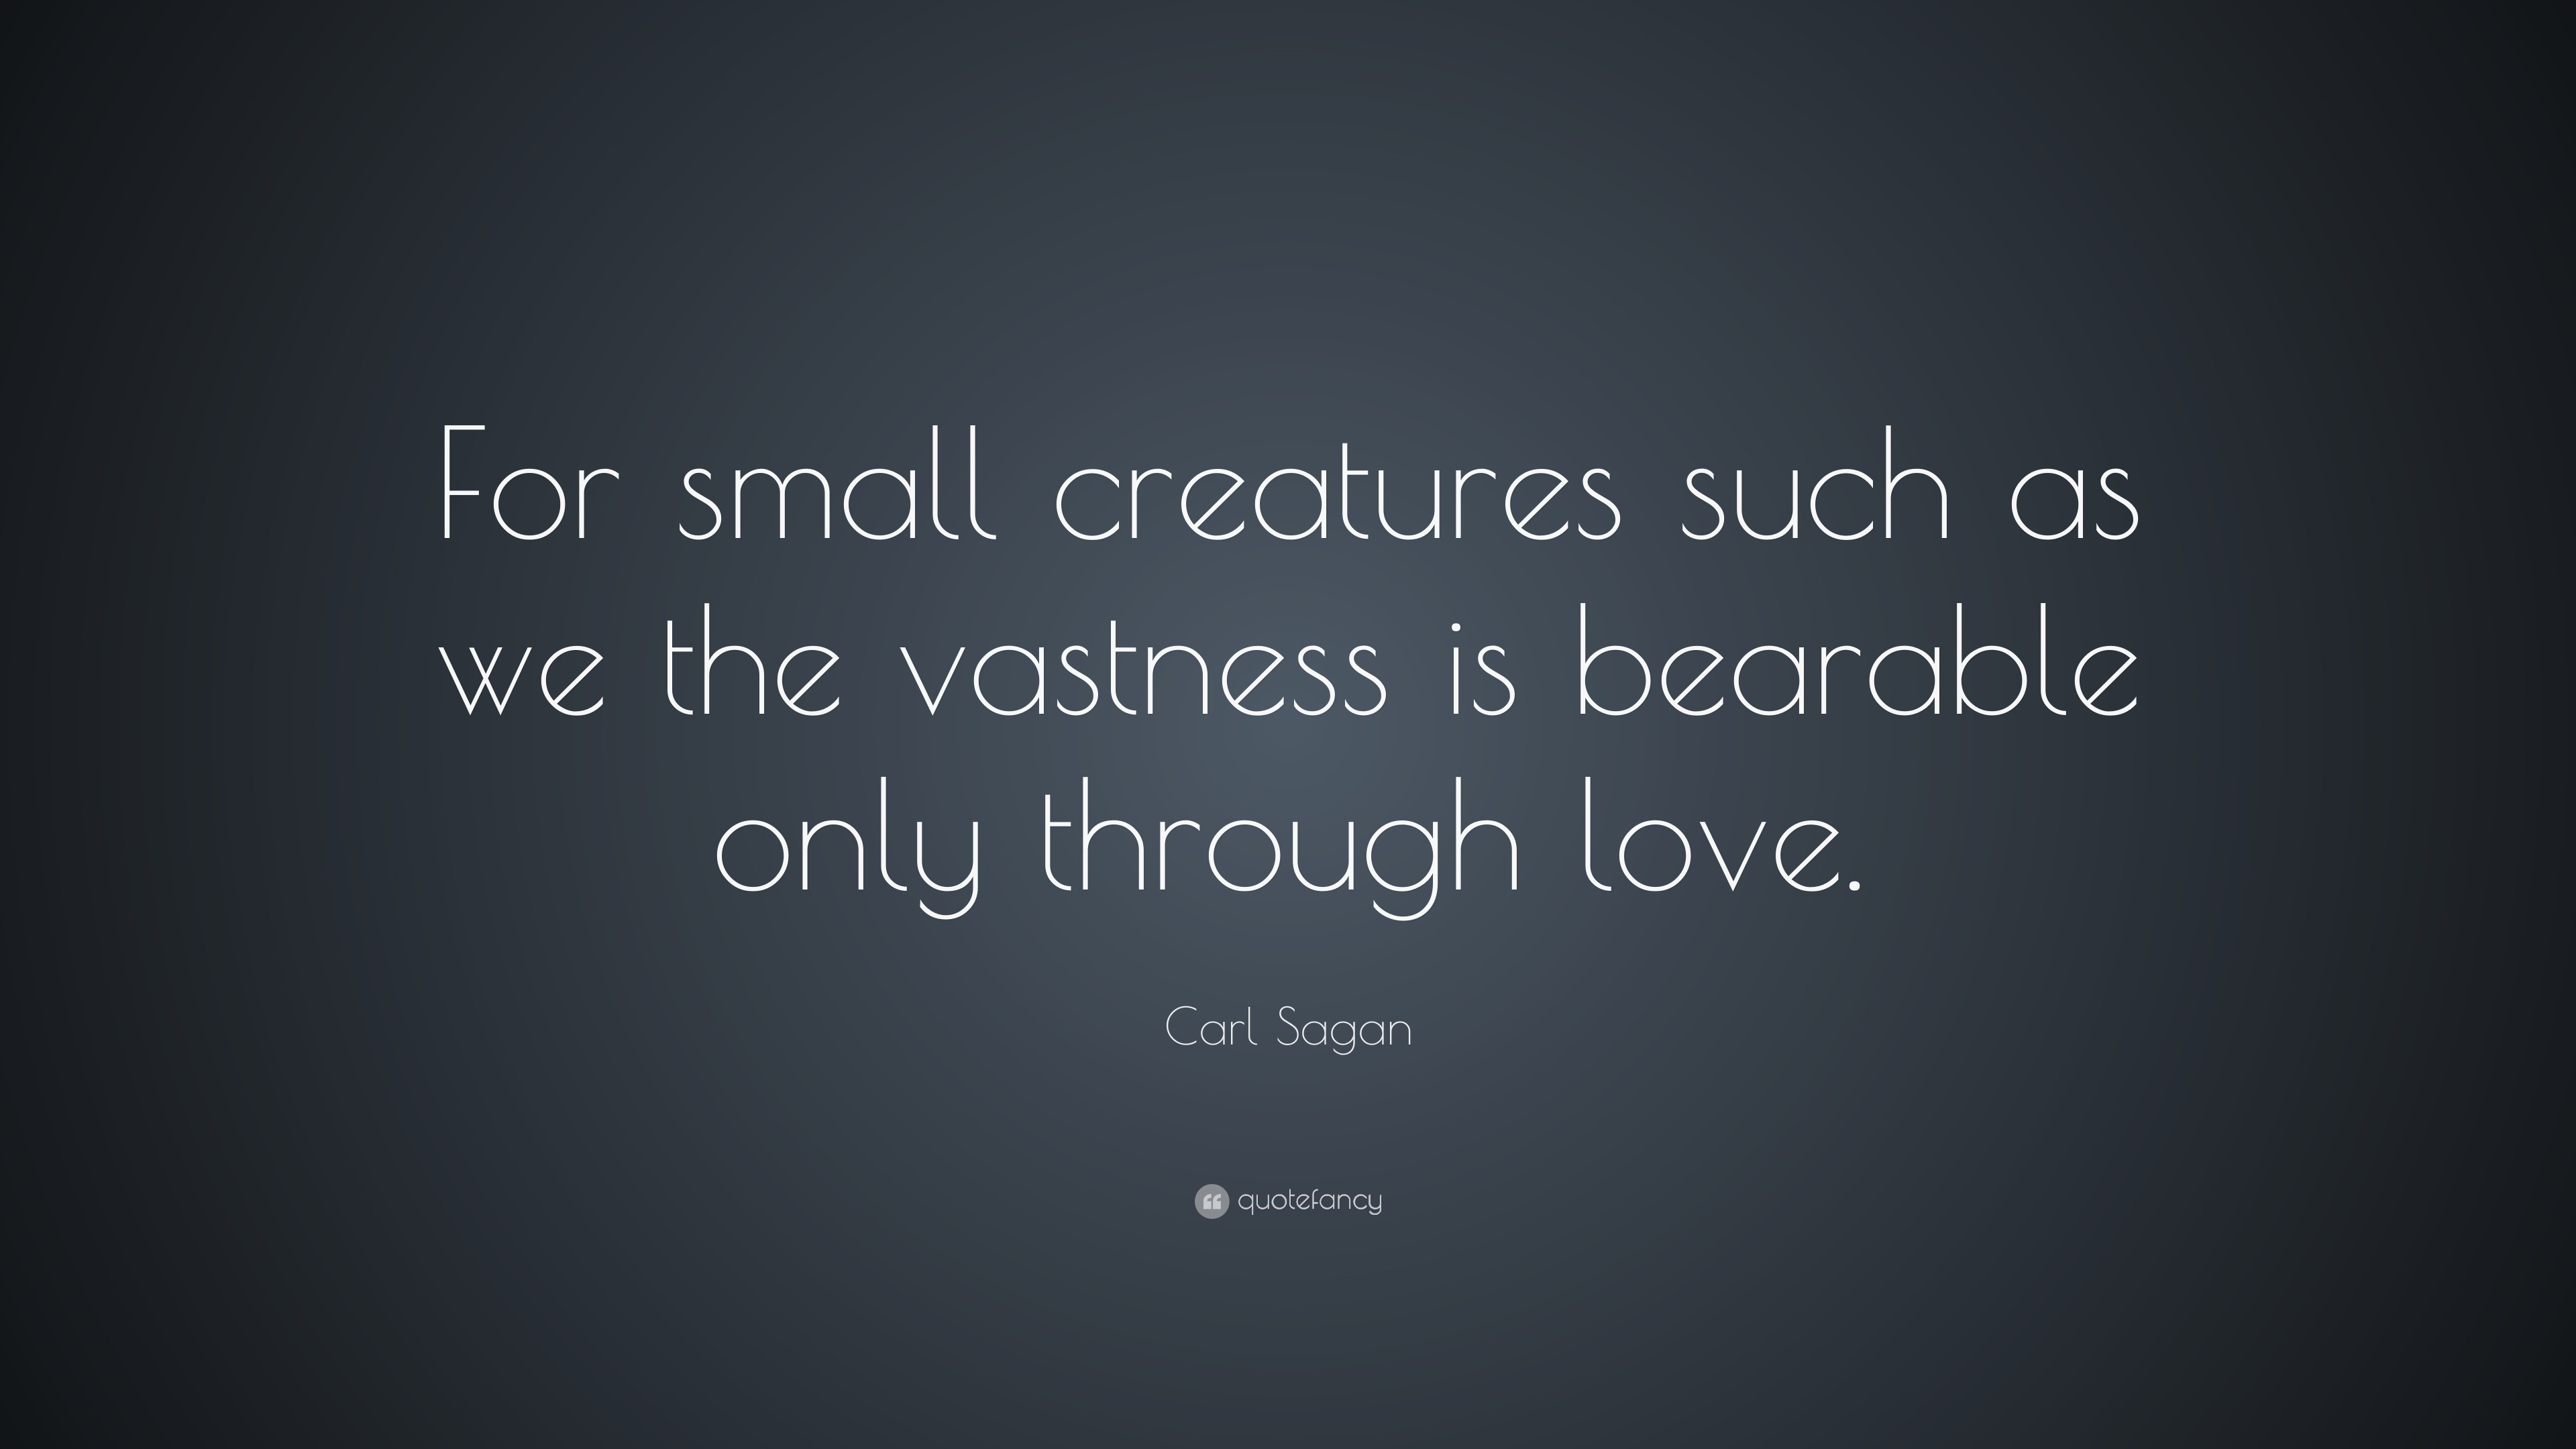 3840x2160 Carl Sagan Quote: “For small creatures such as we the vastness is bearable  only